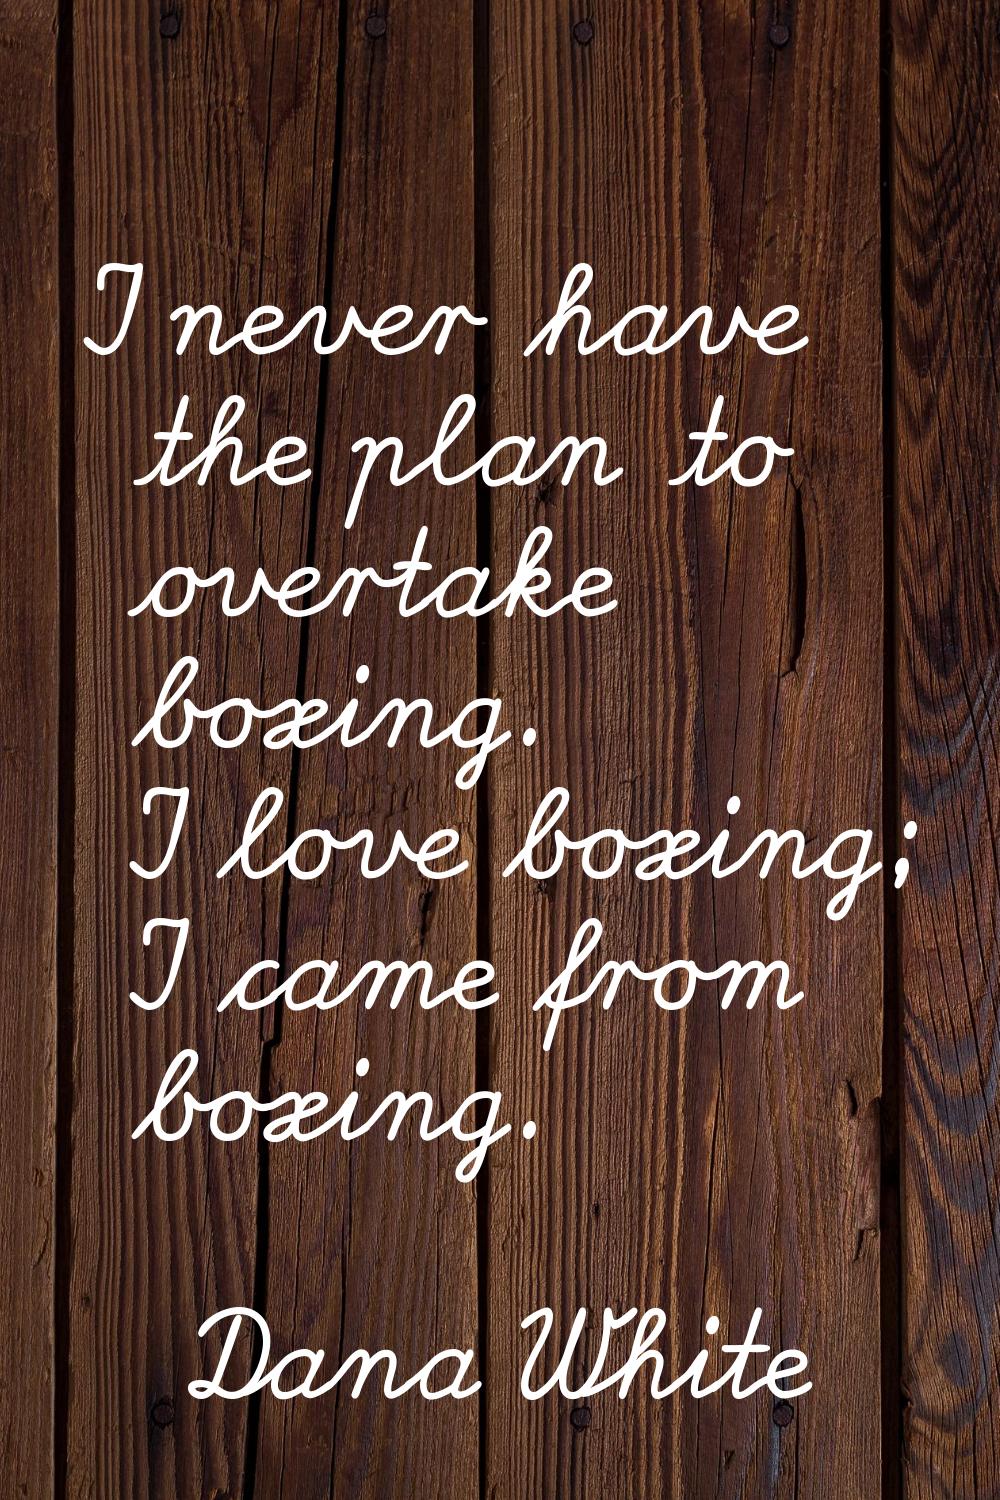 I never have the plan to overtake boxing. I love boxing; I came from boxing.